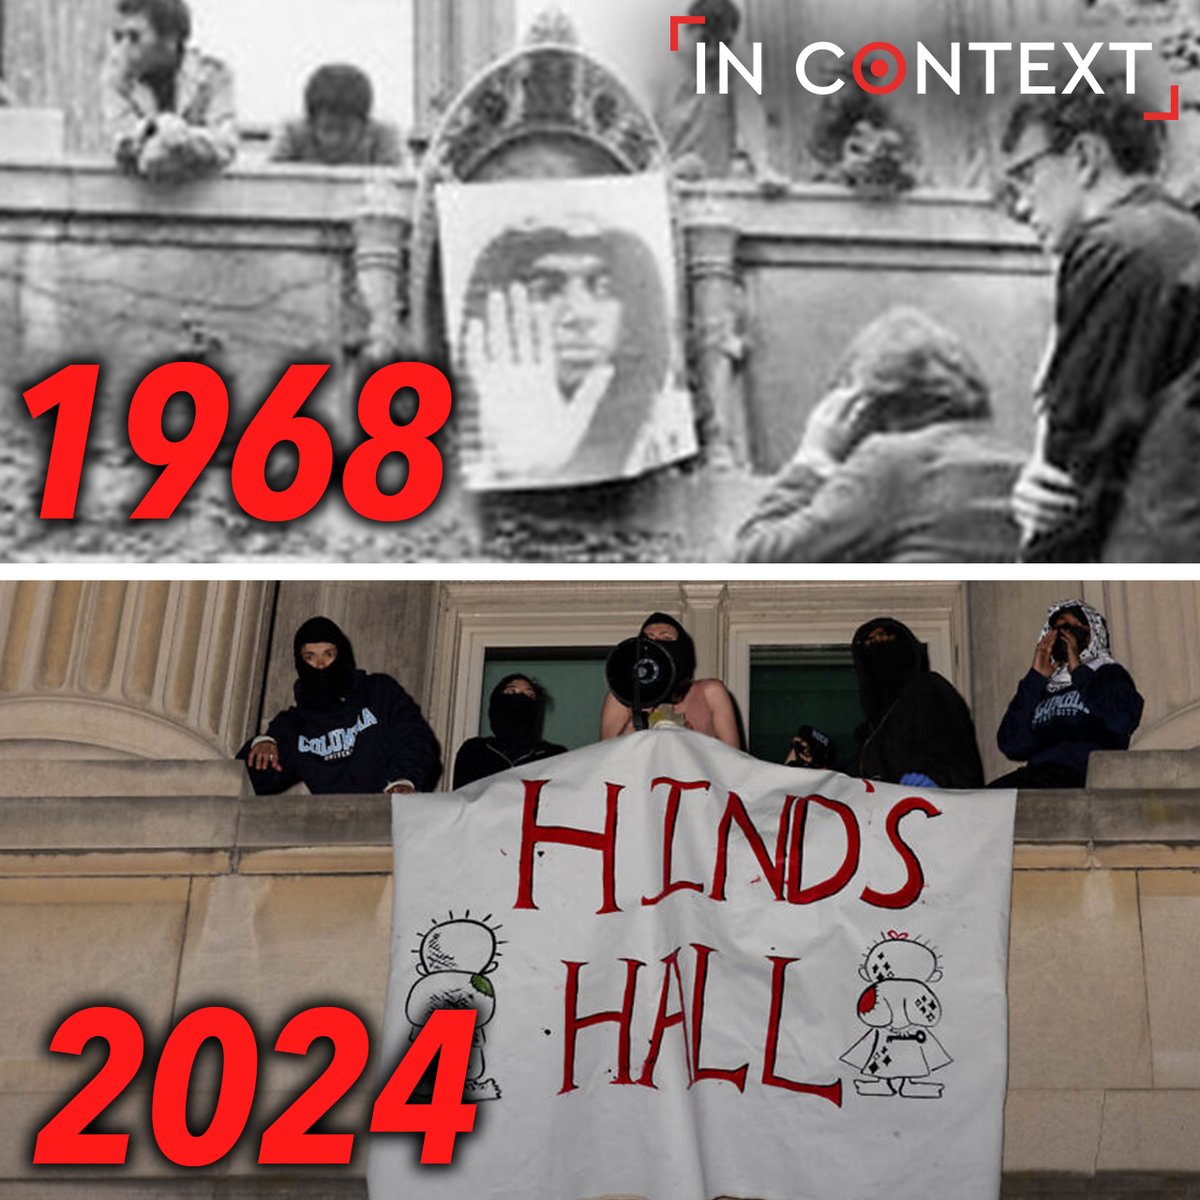 56 years ago, Columbia students occupied Hamilton Hall and renamed it “Nat Turner Hall at Malcolm X University.”

Now Columbia students have occupied the building again. This time renaming it 'Hind’s Hall' after Hind Rajab, a 6-year-old Palestinian girl killed by Israel in Gaza.